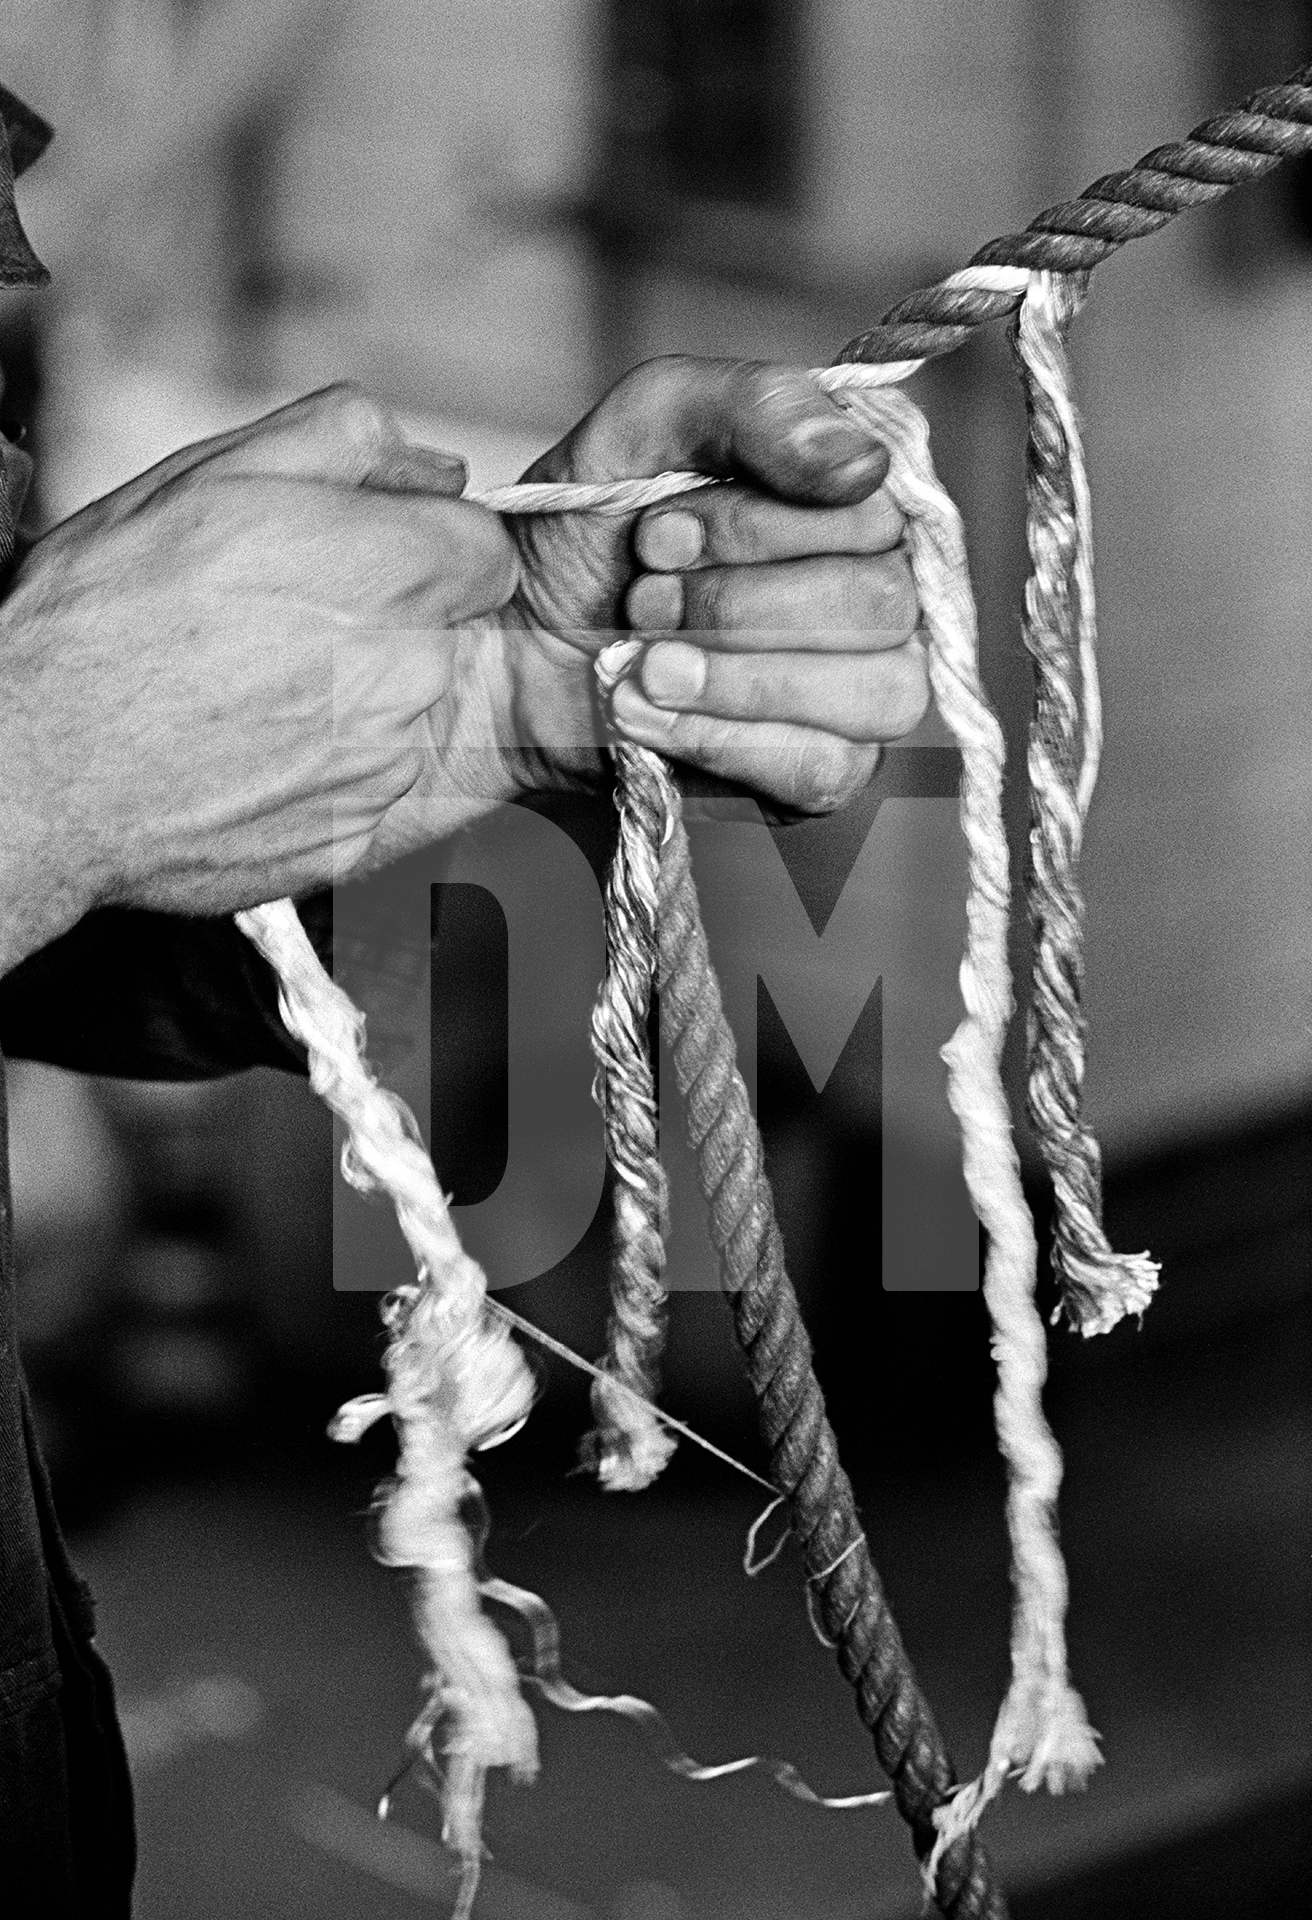 In the engine house. Wakes holiday maintenance. Knotting and splicing governor ropes. July 1976 by Daniel Meadows